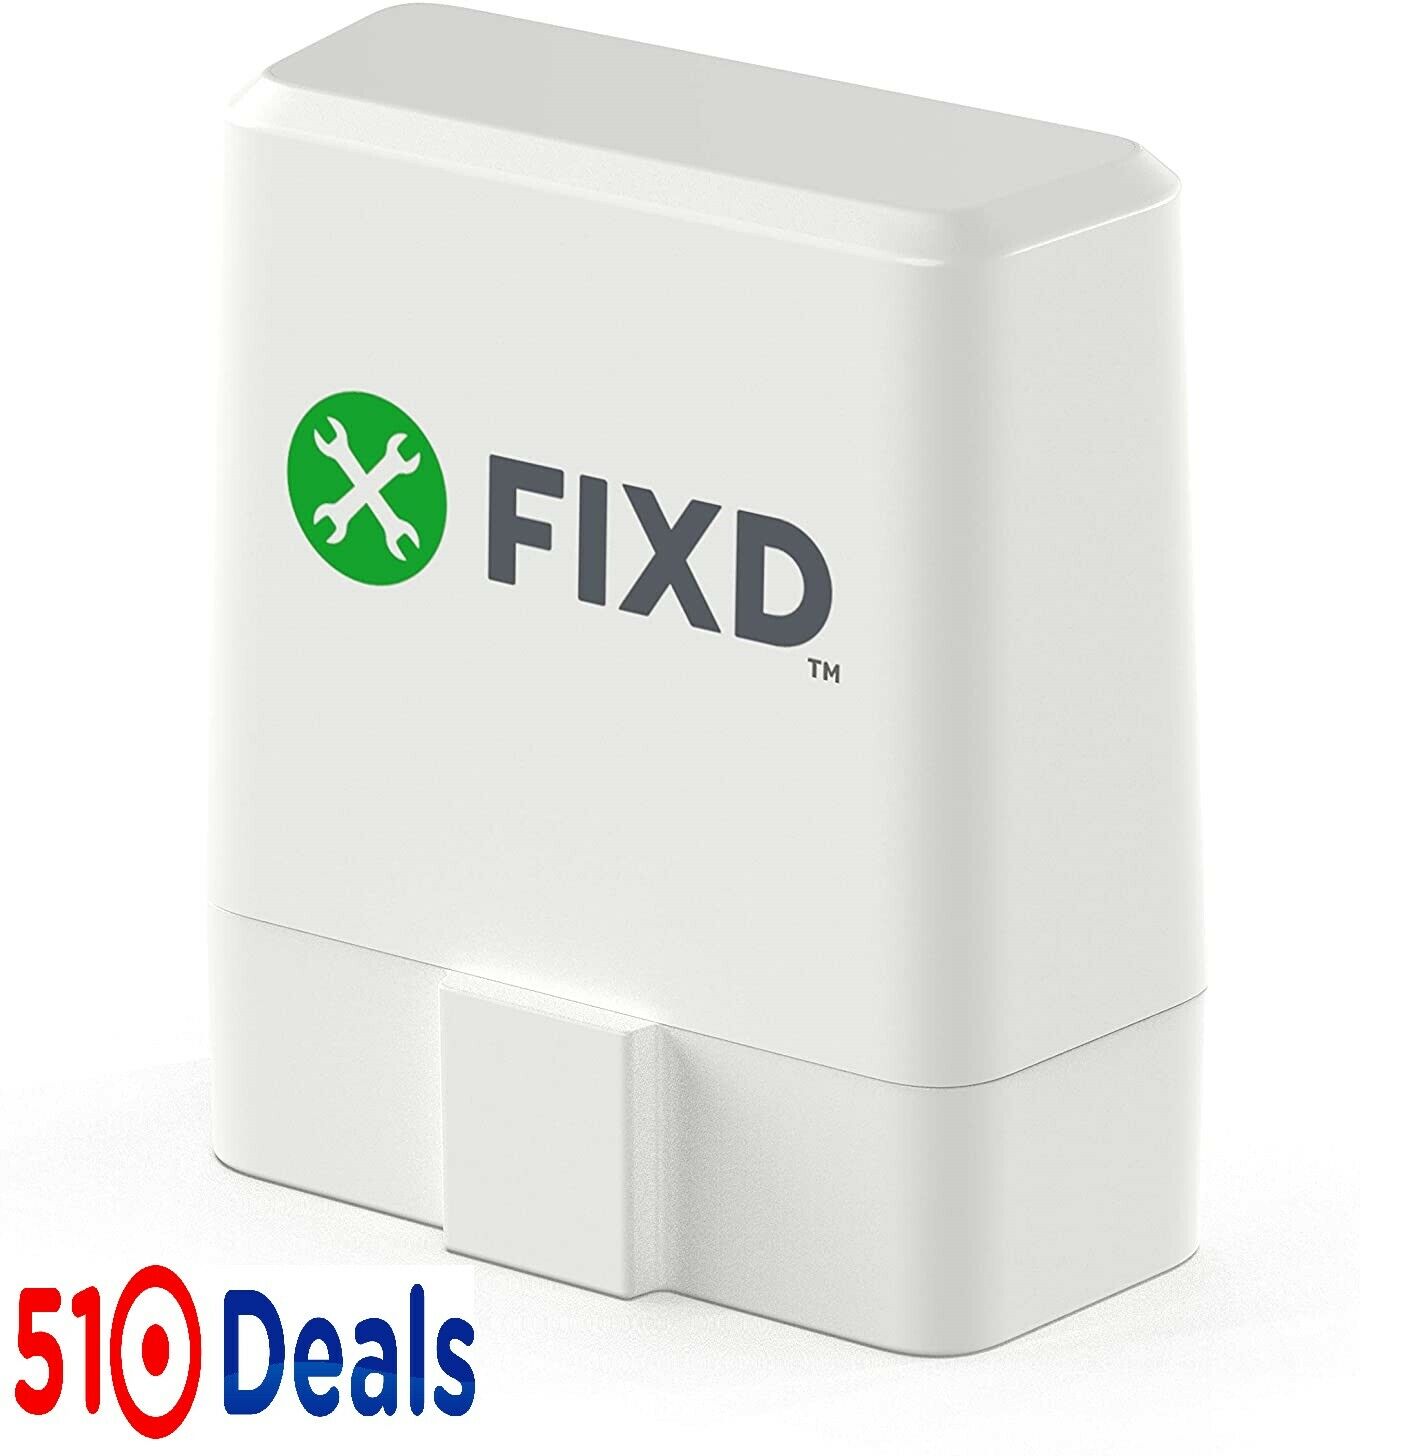 Fixd Obd-ii 2nd Gen Professional Scan Tool Active Car Health Monitoring Reader